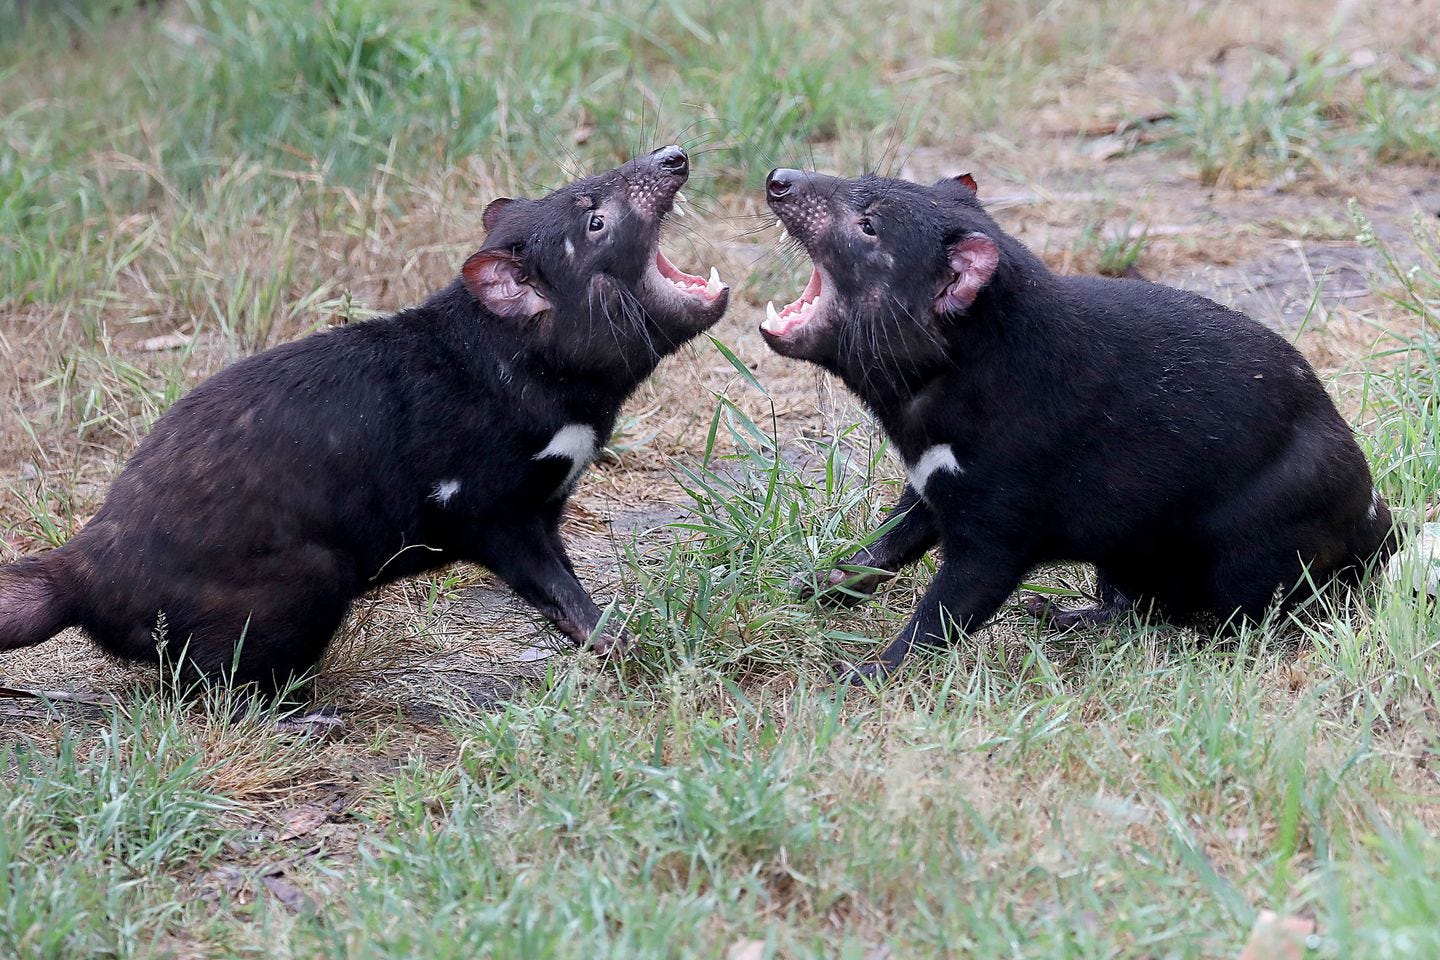 Tasmanian devils fought for a Christmas cracker during the 10th annual Christmas cracker event at Orana Wildlife Park on the outskirts of Christchurch in 2020. Seven Tasmanian devil babies were born this month in Australia, a promising step in the mission to rescue the endangered animal.